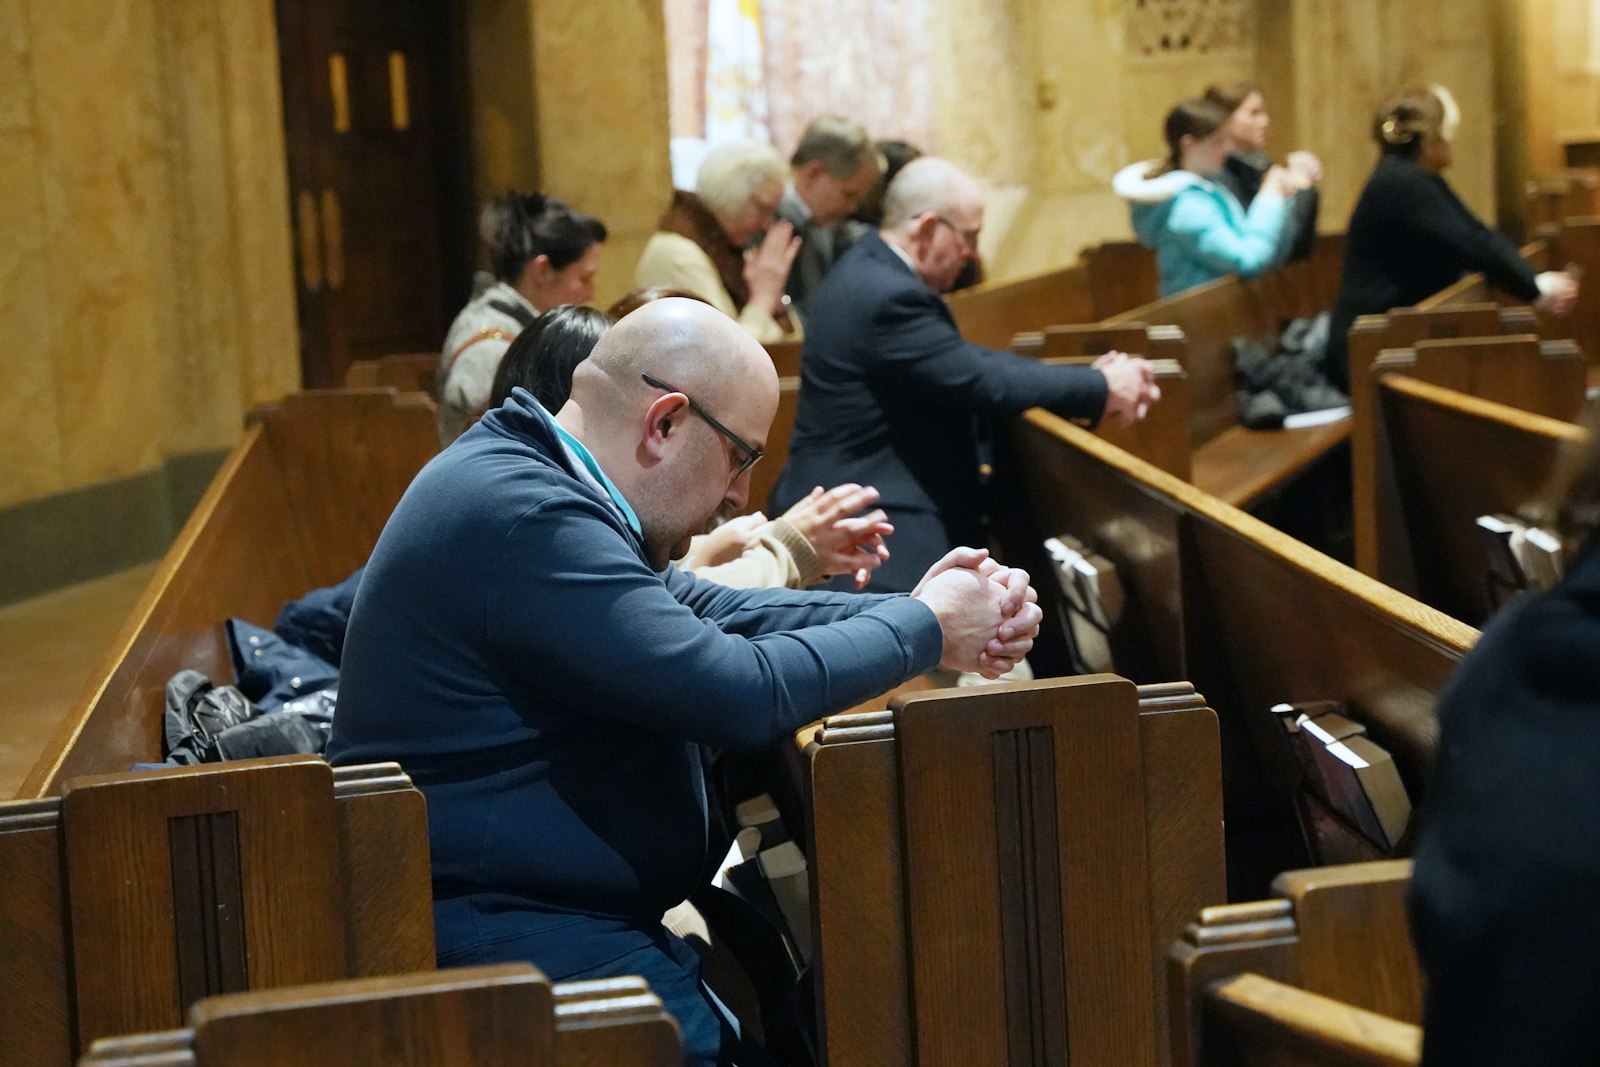 A man prays at the National Shrine of the Little Flower Basilica in Royal Oak during a Mass that marked the 51 years since the U.S. Supreme Court's Roe v. Wade decision, which legalized abortion nationally. That decision has since been overturned, but a constitutional referendum in 2022 placed abortion rights into Michigan's state constitution.